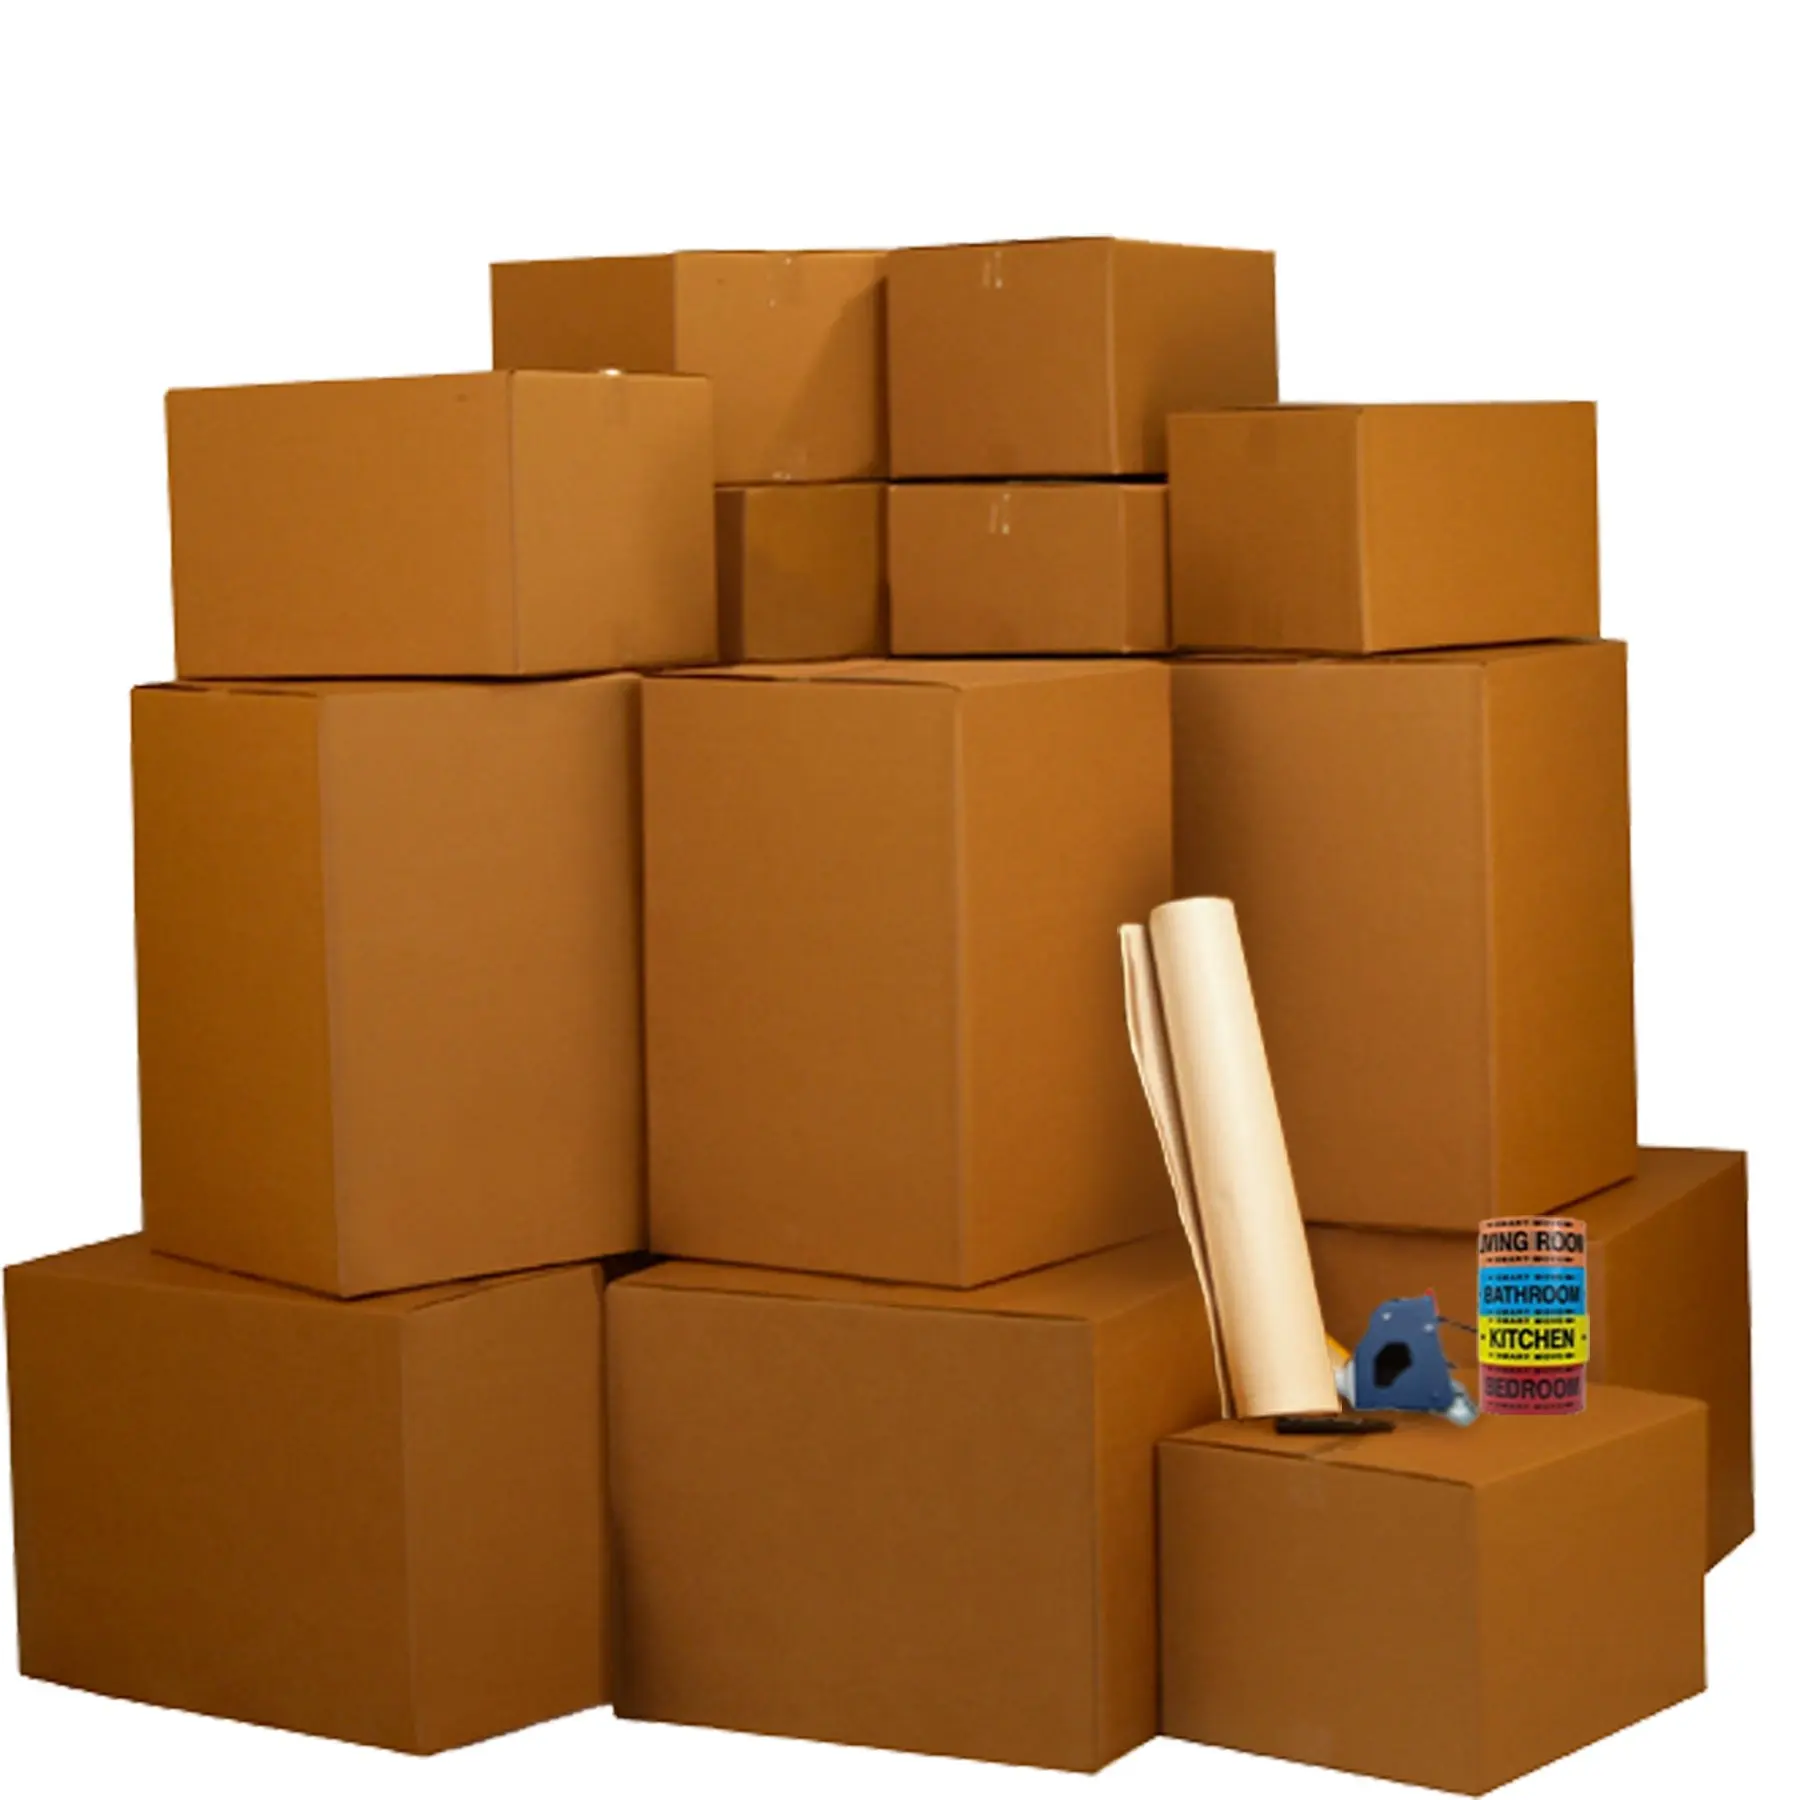 Move package. Moving Supply. Packing Supplies. 10 UBOXES 96x60x93 per Box.